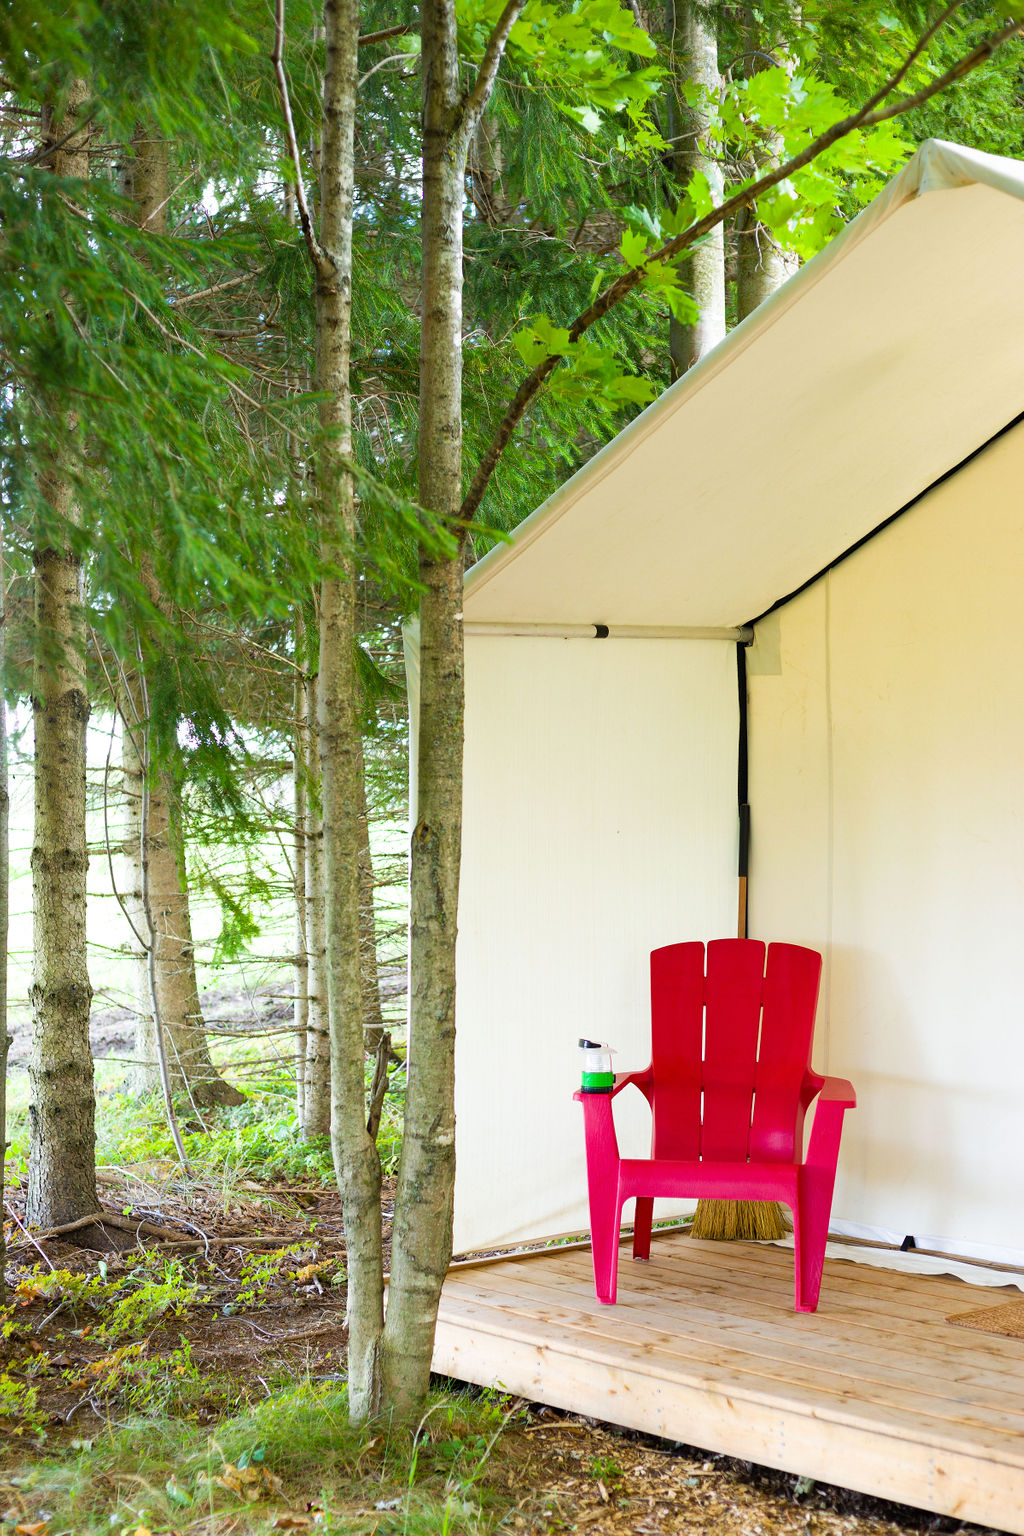 Glamping tents at Irvineside Farm offer private views enjoyed from the deck, with Muskoka chairs.